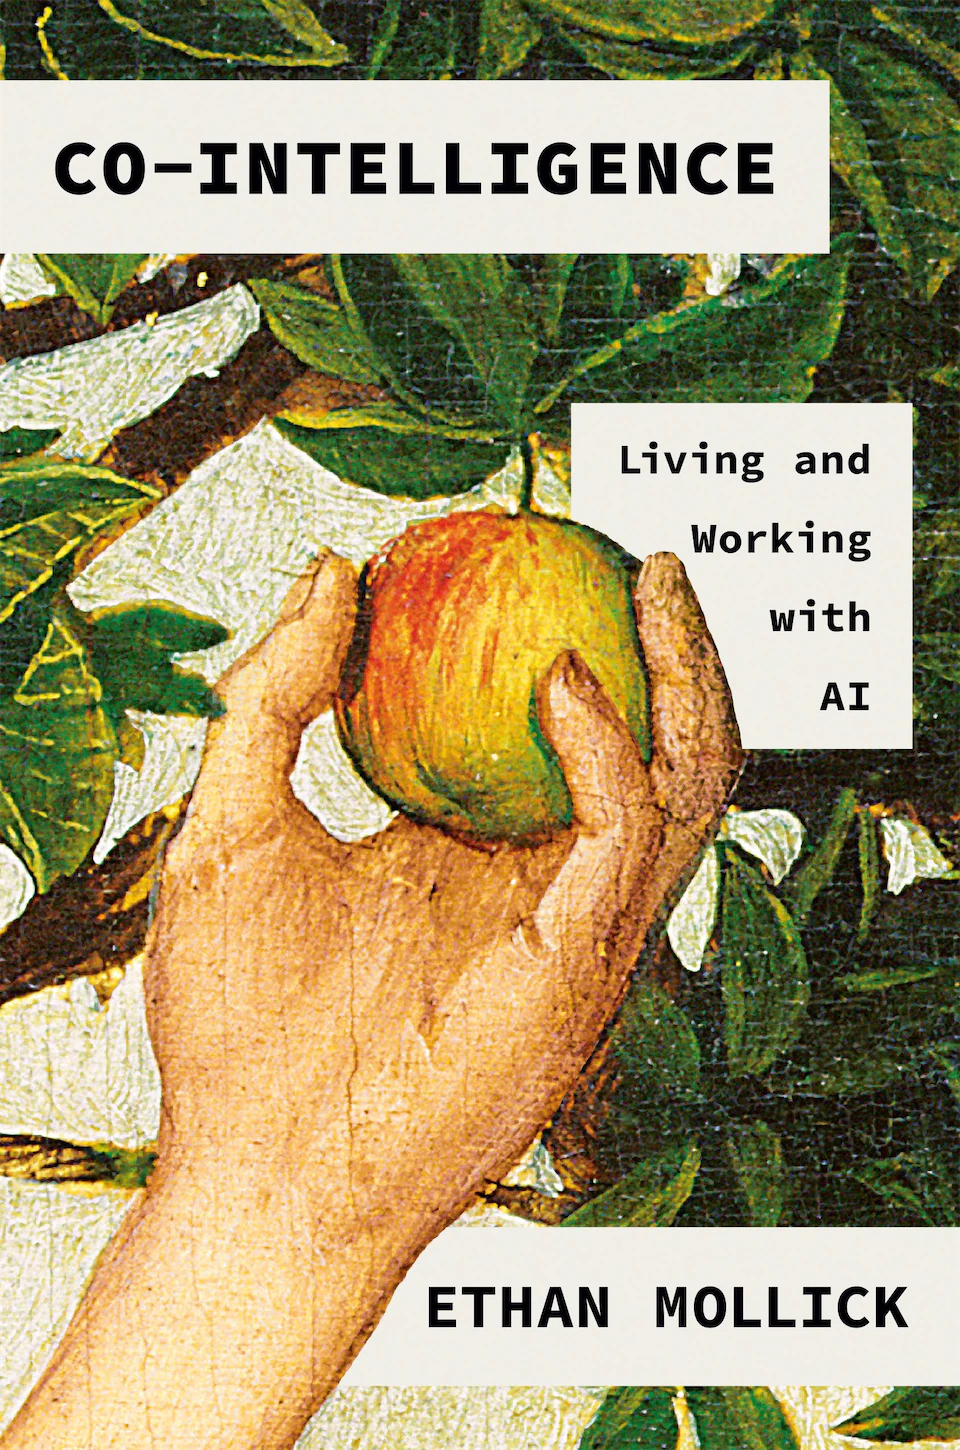 Co-Intelligence: Living and Working with AI by Ethan Mollick finished on 2024 Jun 07